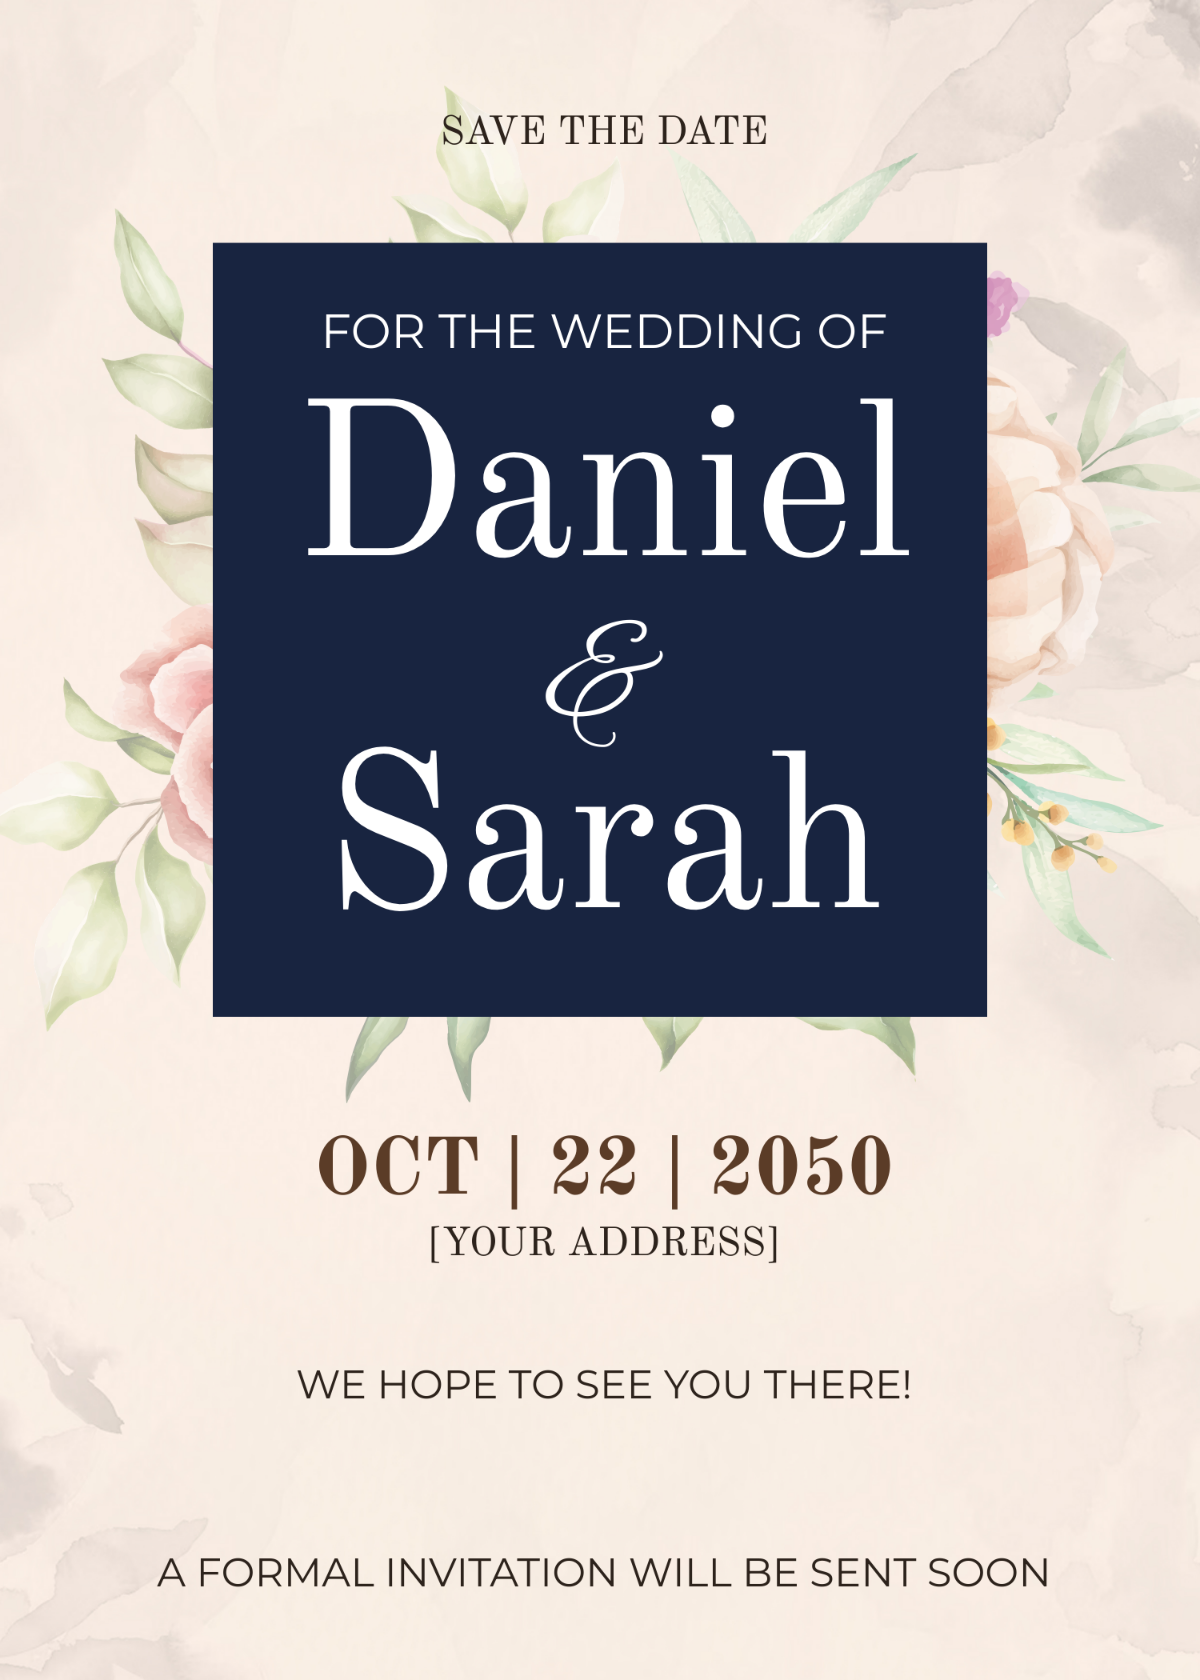 Save the Date Wedding Poster